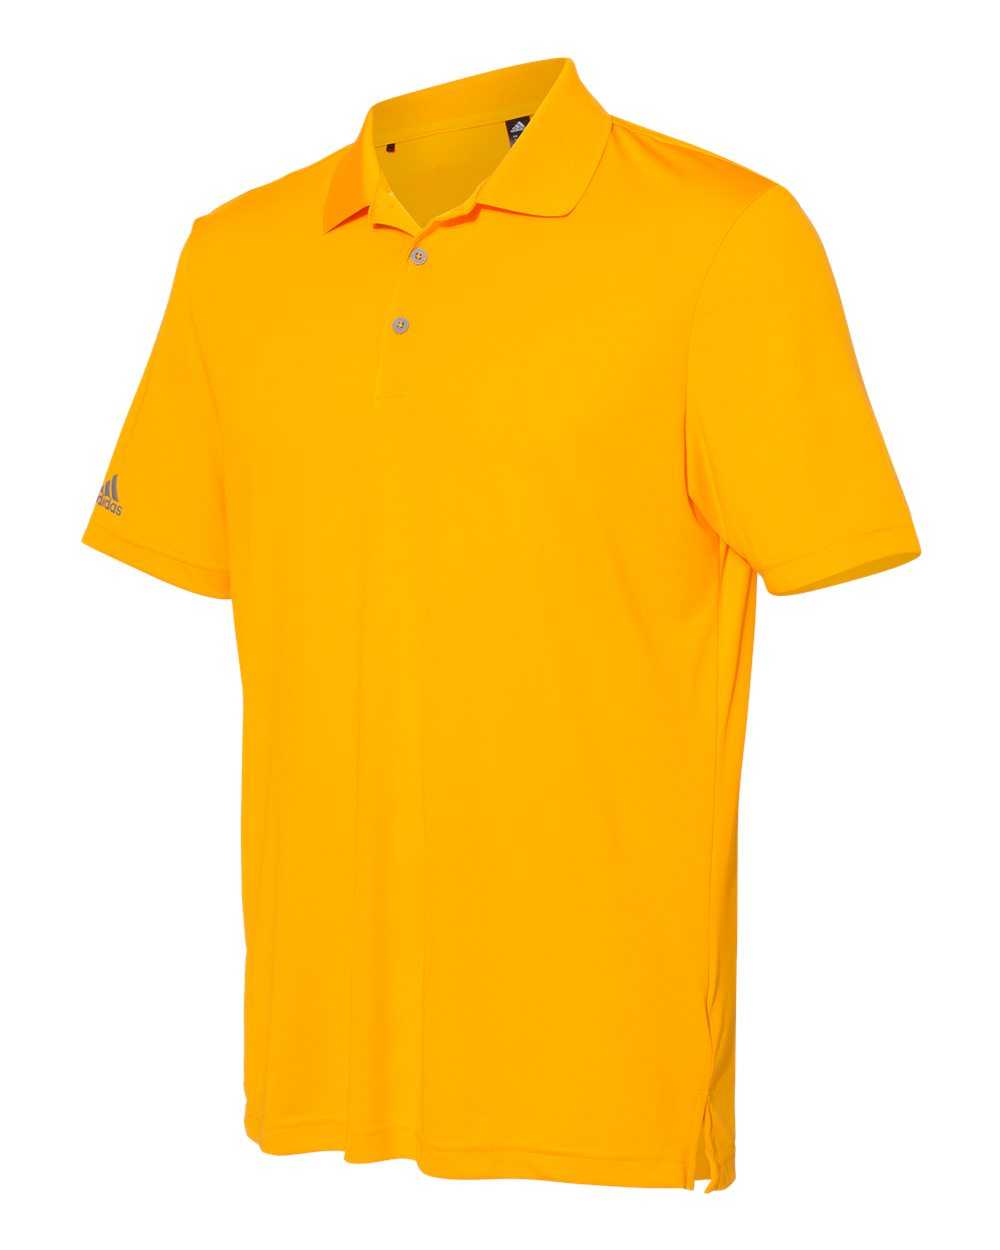 Adidas A230 Performance Sport Shirt - Collegiate Gold - HIT a Double